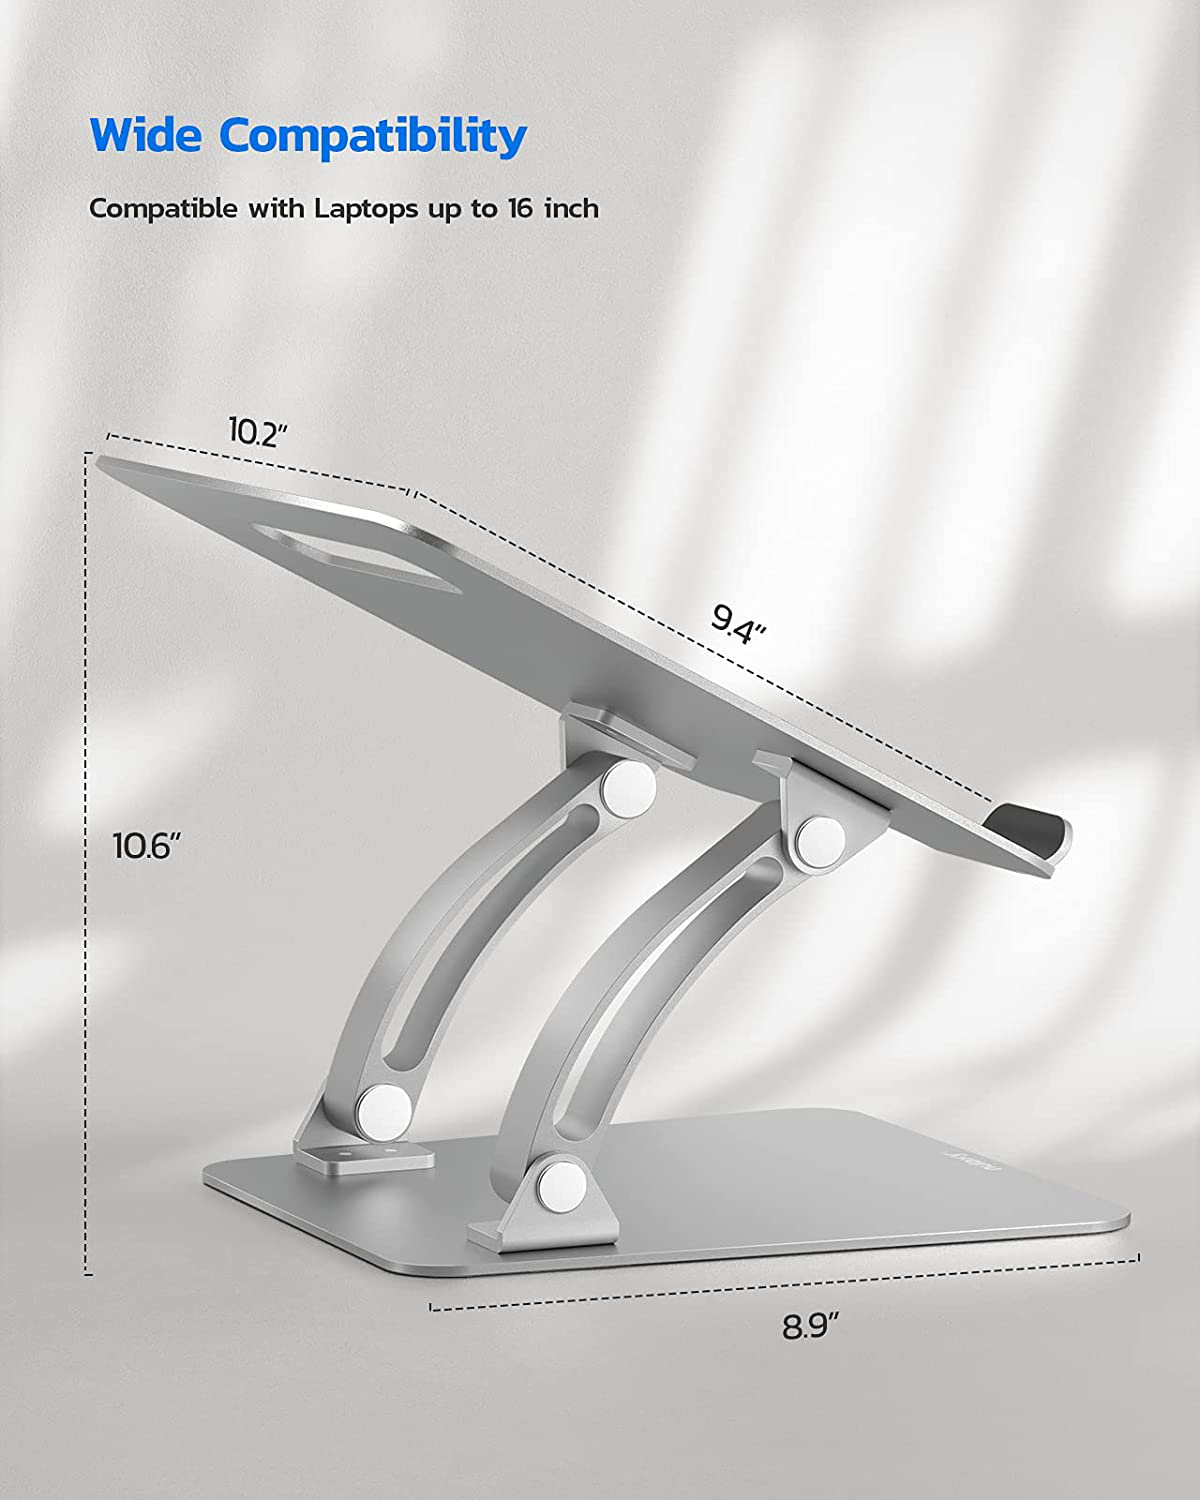 Nulaxy Laptop Stand, Ergonomic Height Angle Adjustable Computer Laptop Holder Compatible with All Laptops 11-17", Supports Up to 44 Lbs